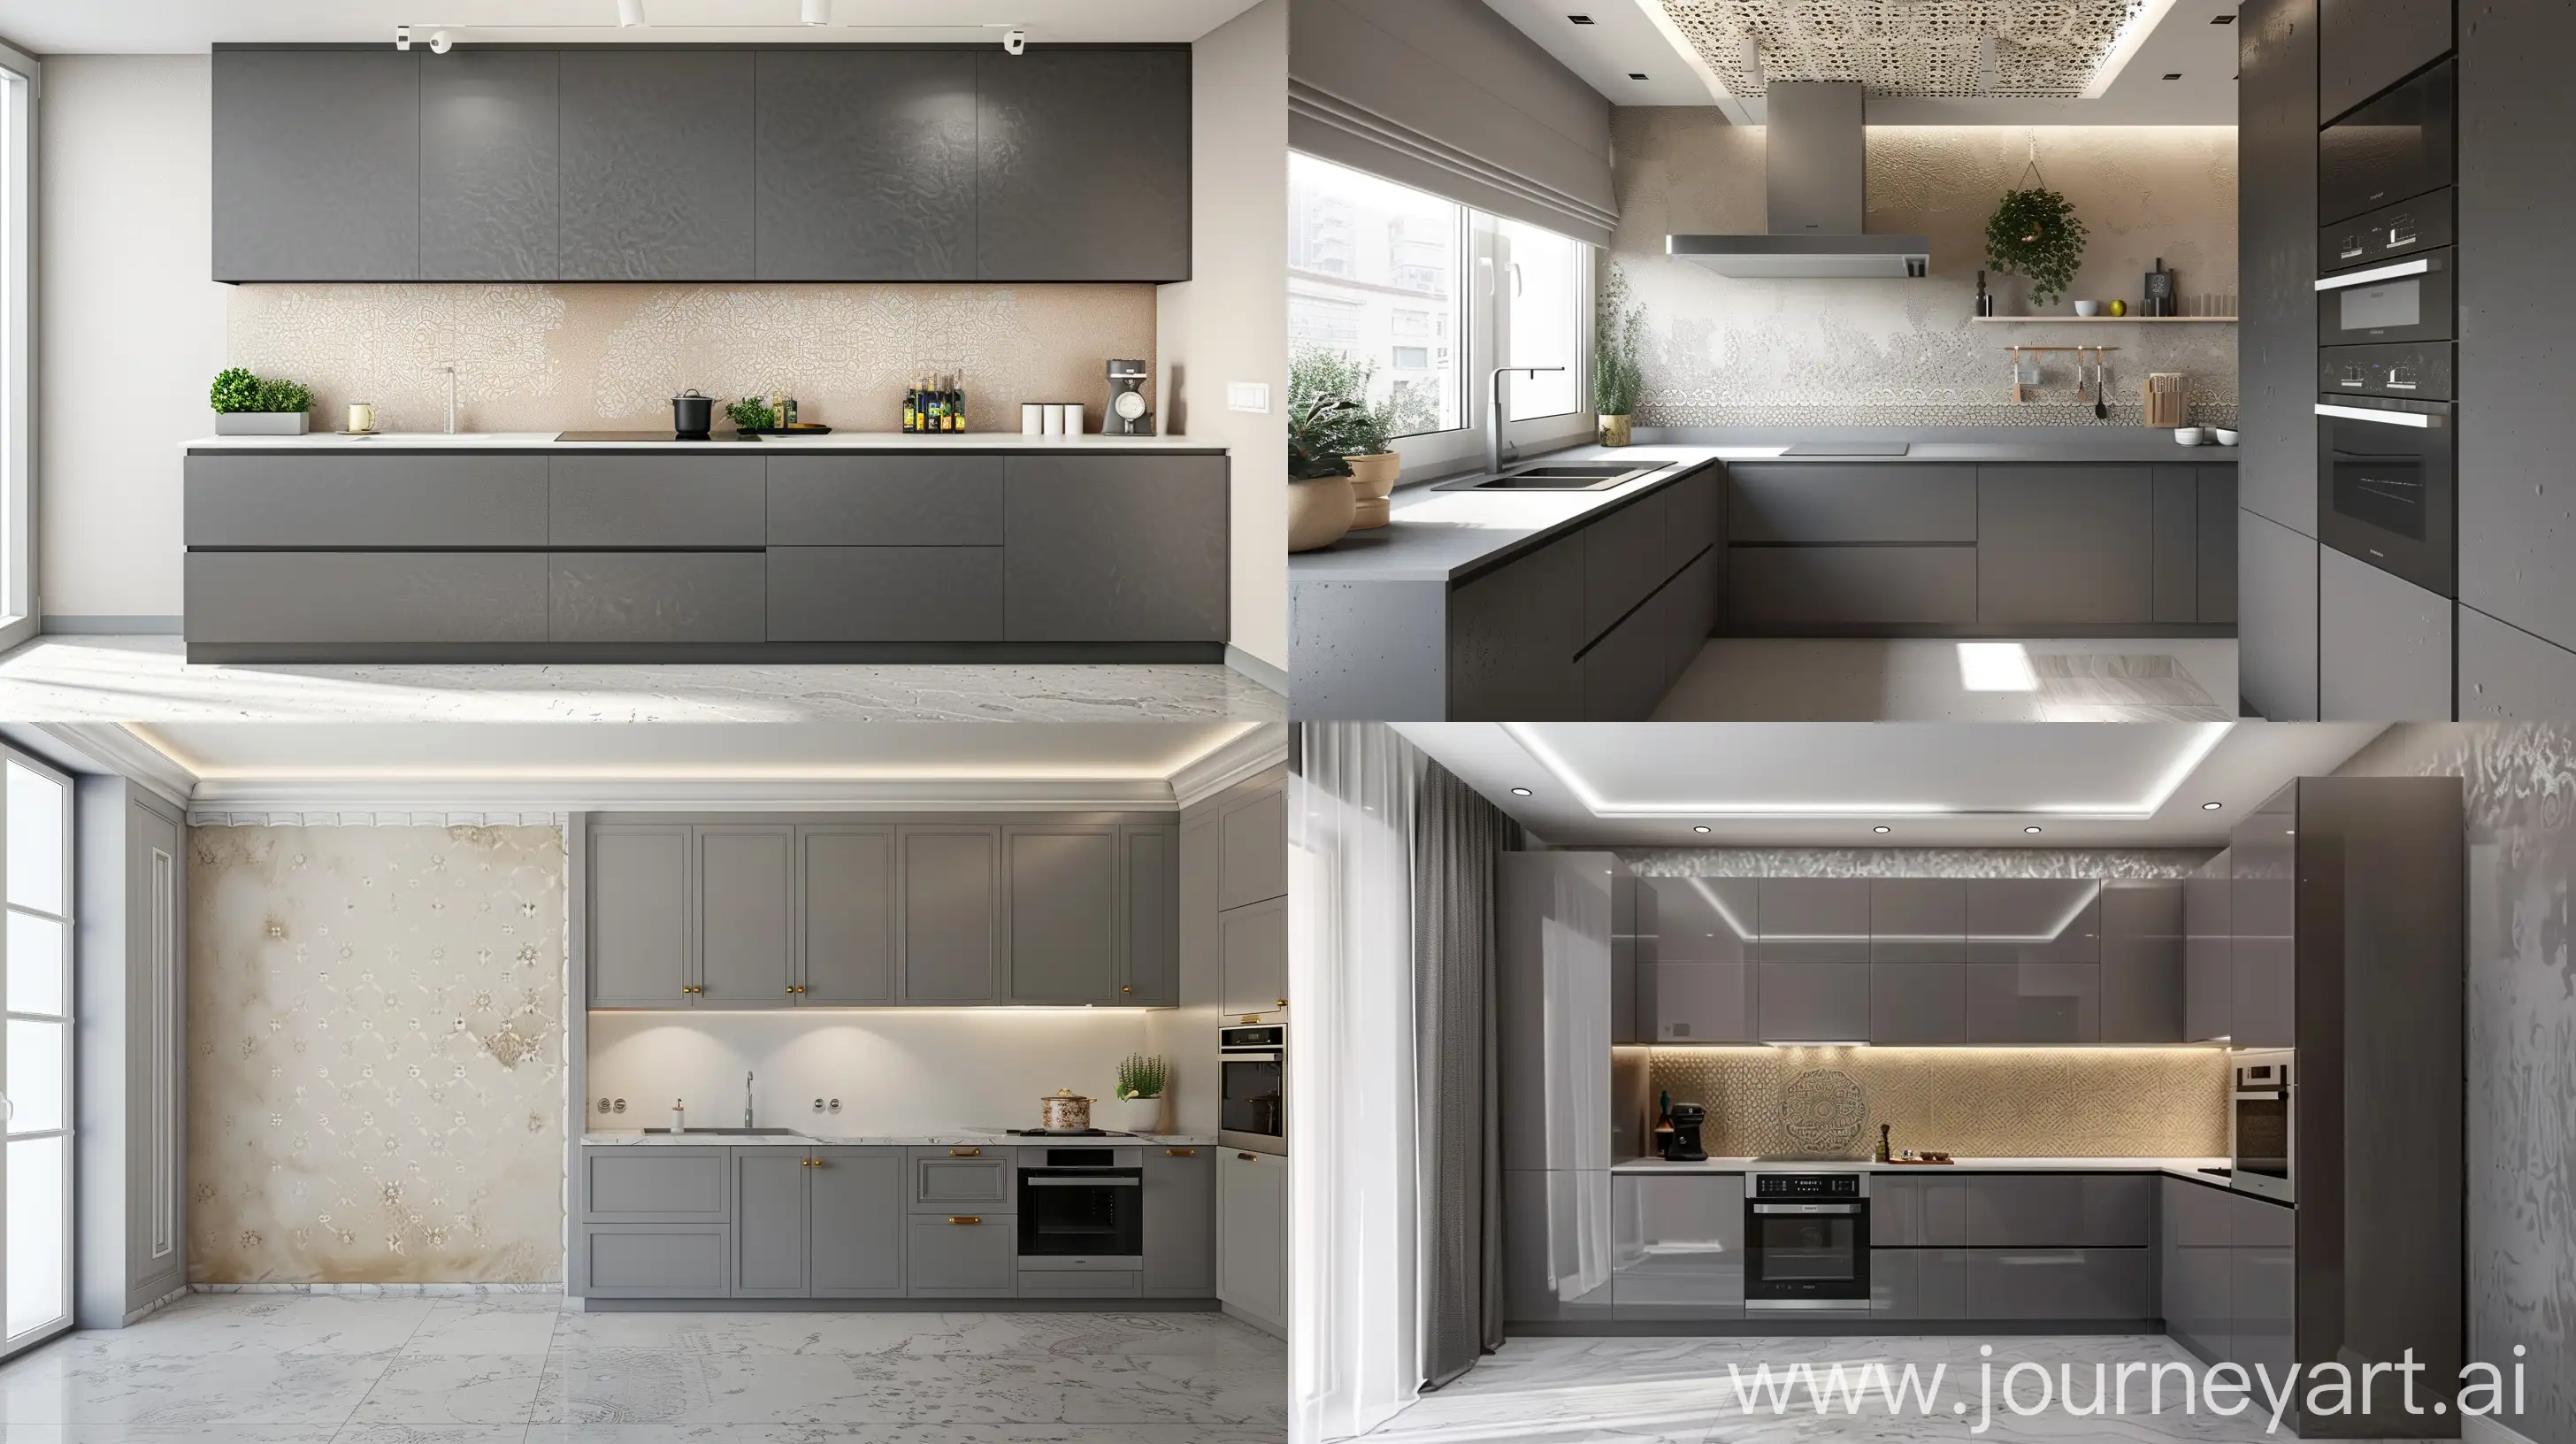 Realistic-Grey-Kitchen-Design-with-Beige-Mandala-Patterns-and-White-Stretch-Ceiling